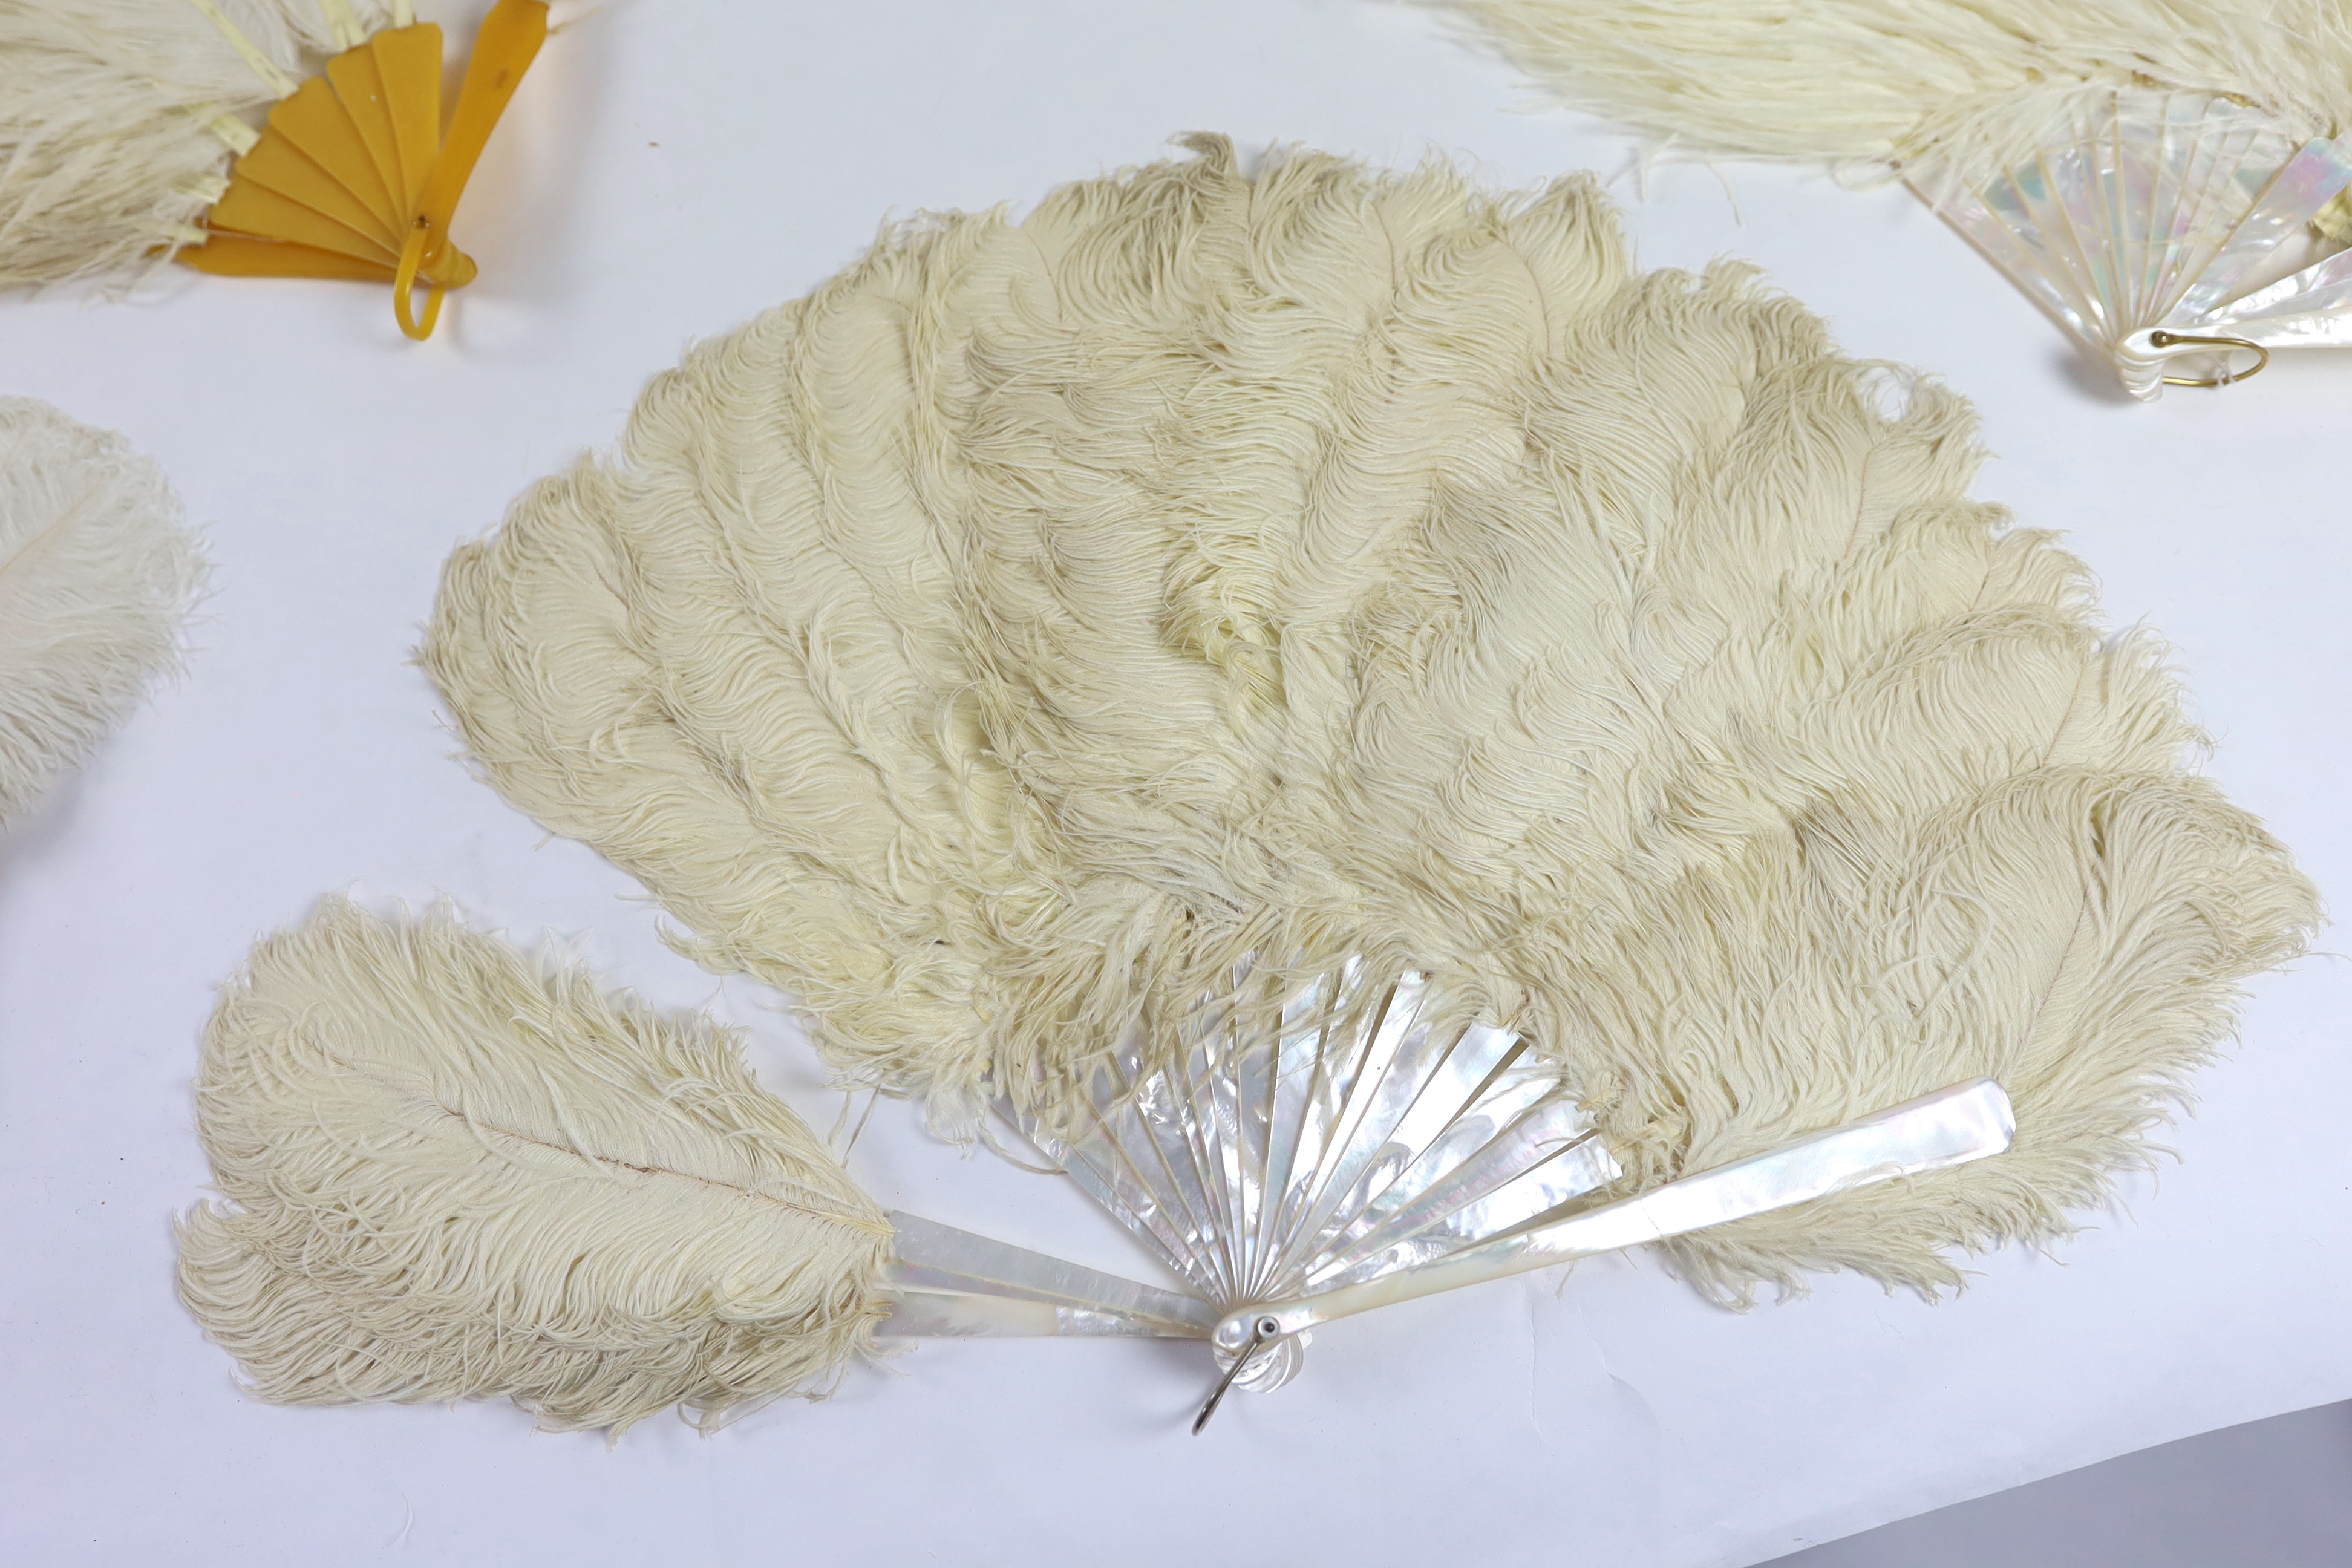 Two early 20th century Ostrich feather and mother of pearl fans, another similar fan with amber Bakelite handle and a small tortoiseshell and feather fan (4)